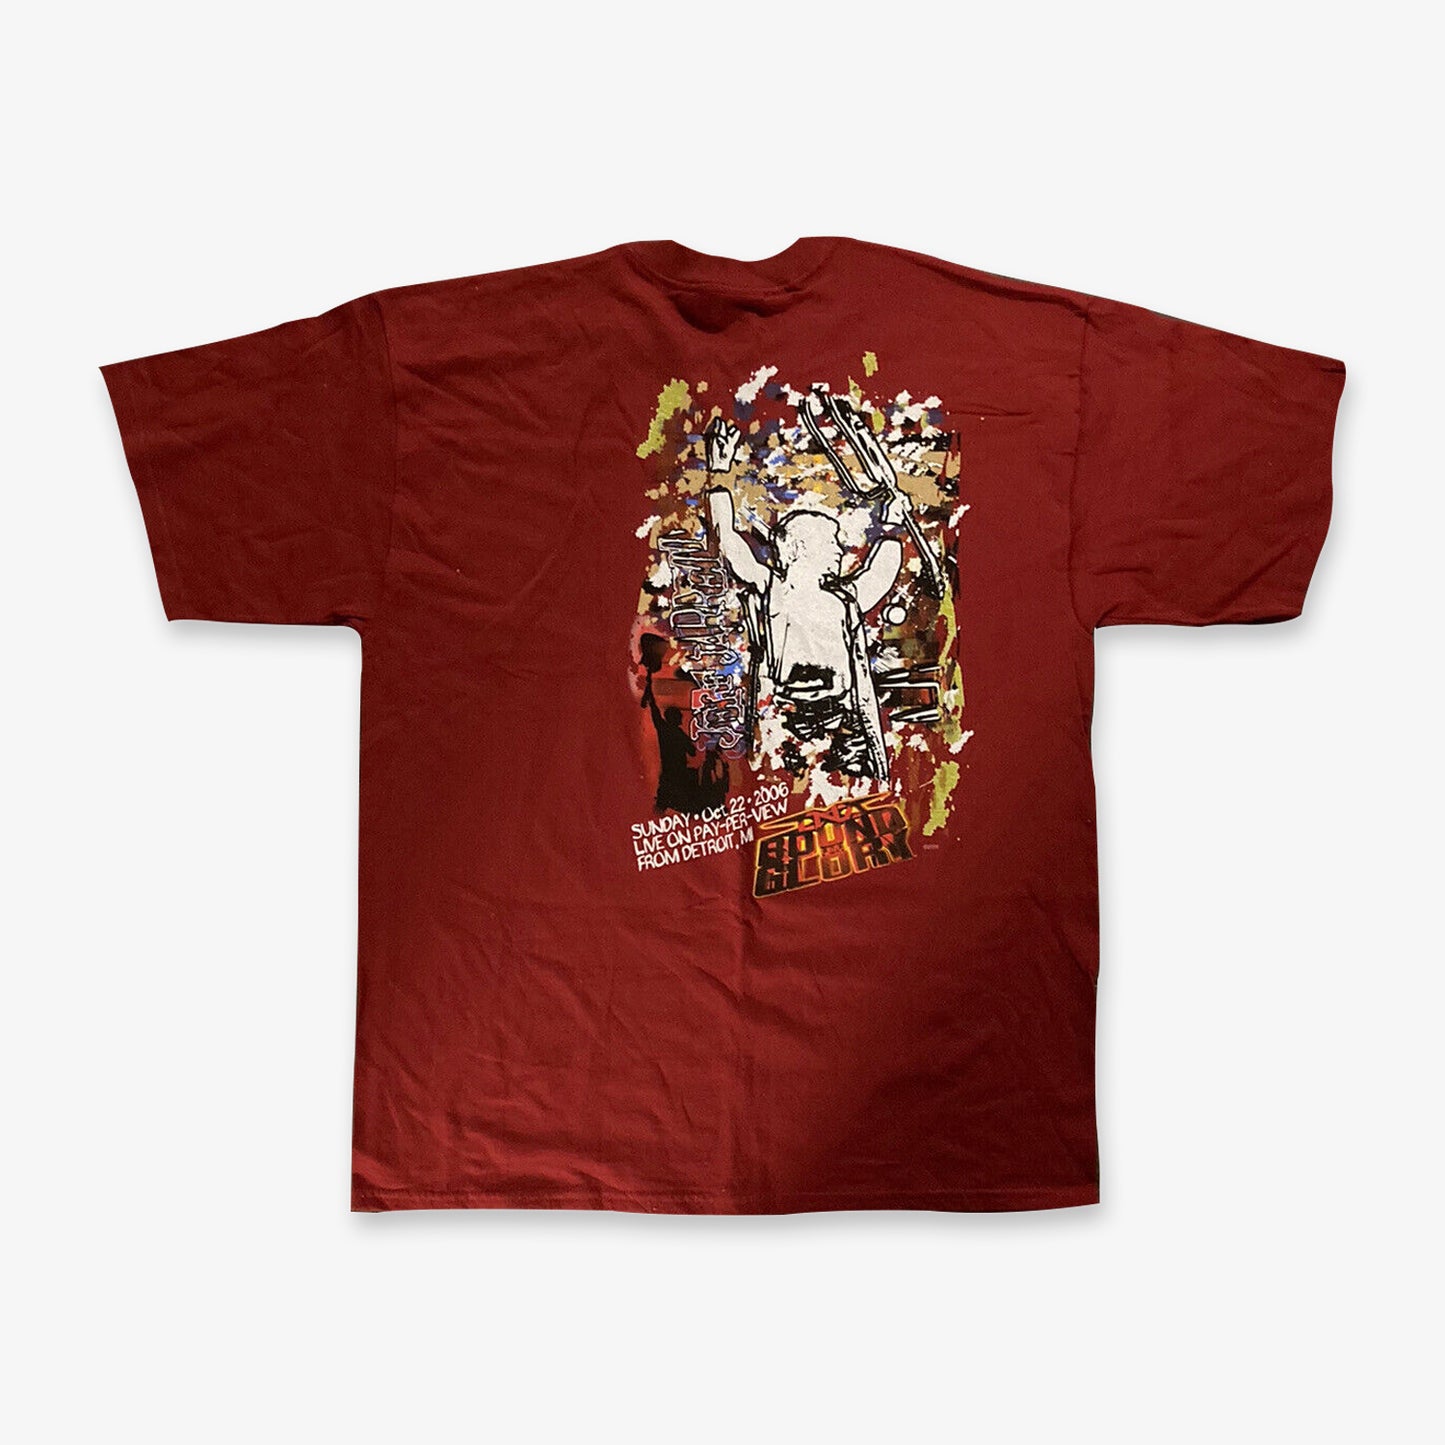 Bound For Glory 2006 Event Shirt